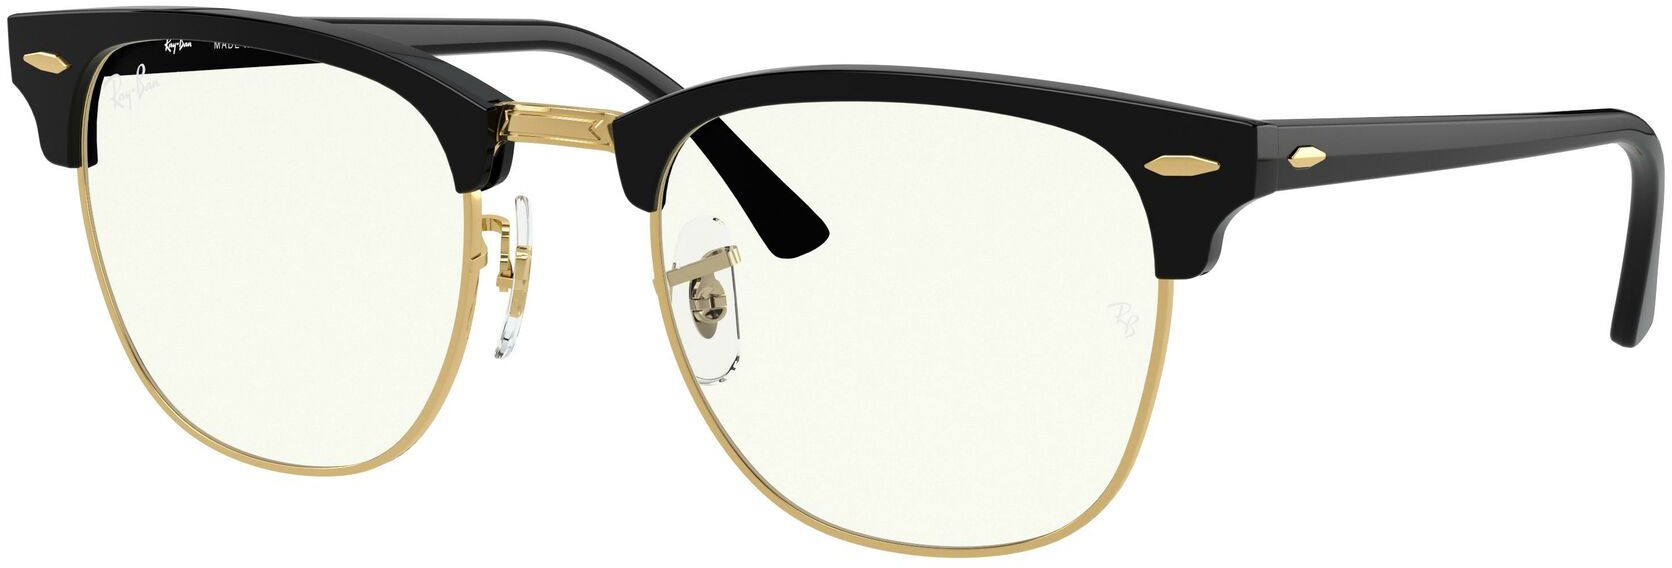 clubmaster glasses rayban